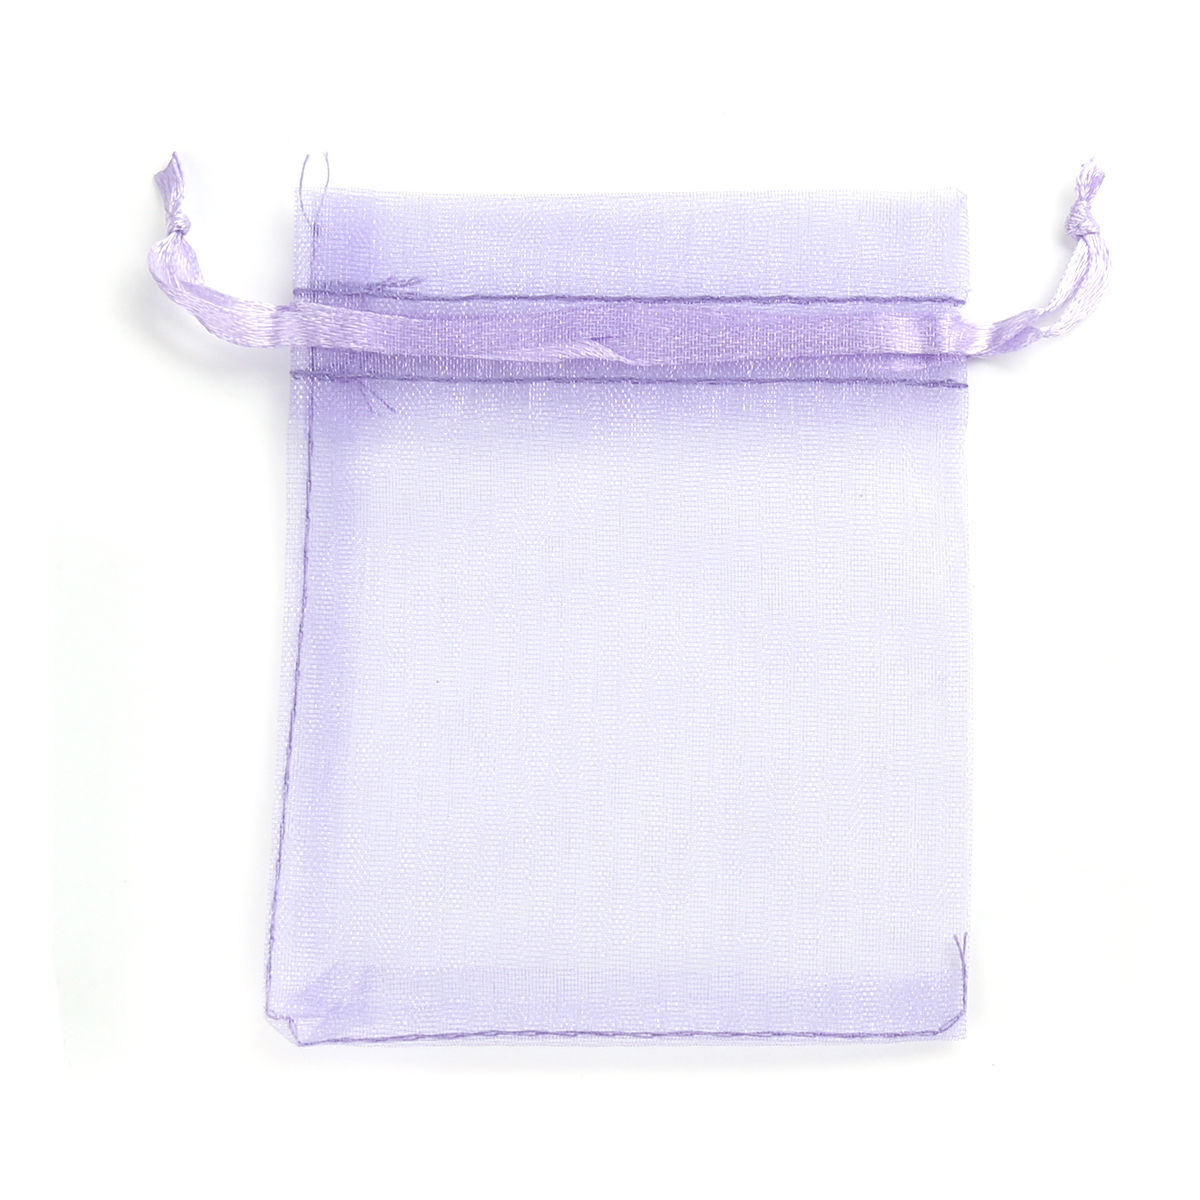 Picture of Wedding Gift Organza Jewelry Bags Drawstring Rectangle Violet 10cm x8cm(3 7/8" x3 1/8"), (Usable Space: 8x8cm) 30 PCs